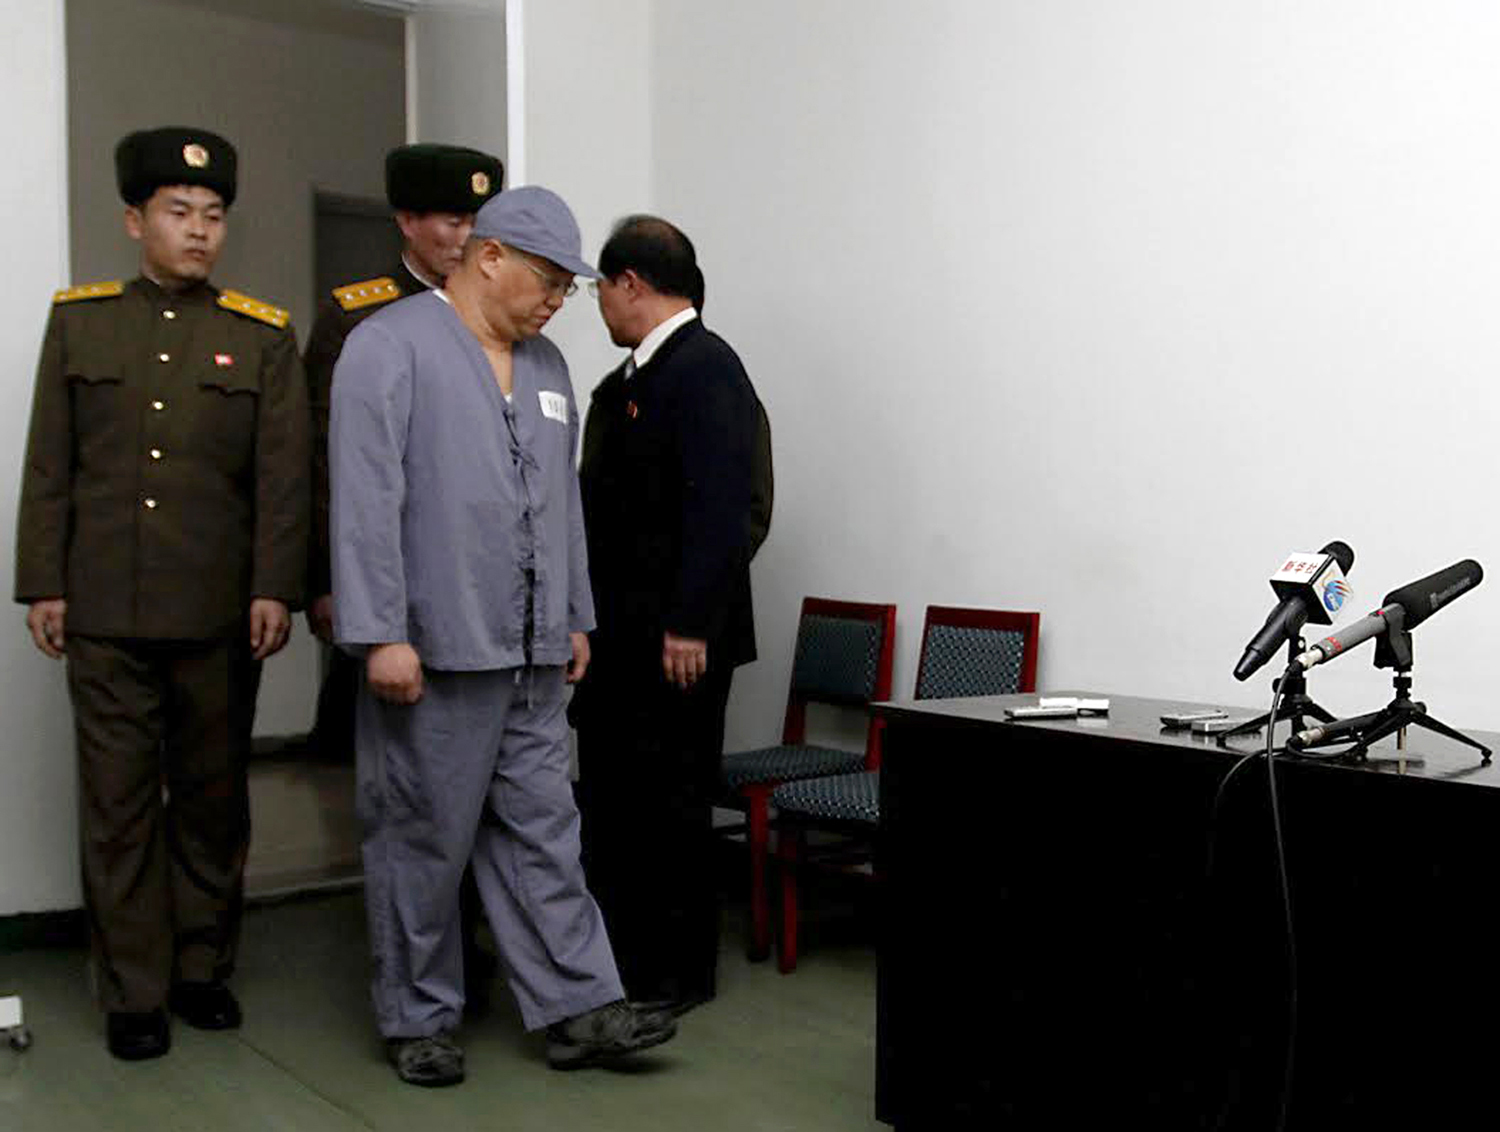 American missionary Kenneth Bae, second from right, arrives to speak to reporters at Pyongyang Friendship Hospital in Pyongyang on Jan. 20, 2014. (Kim Kwang Hyon — AP)